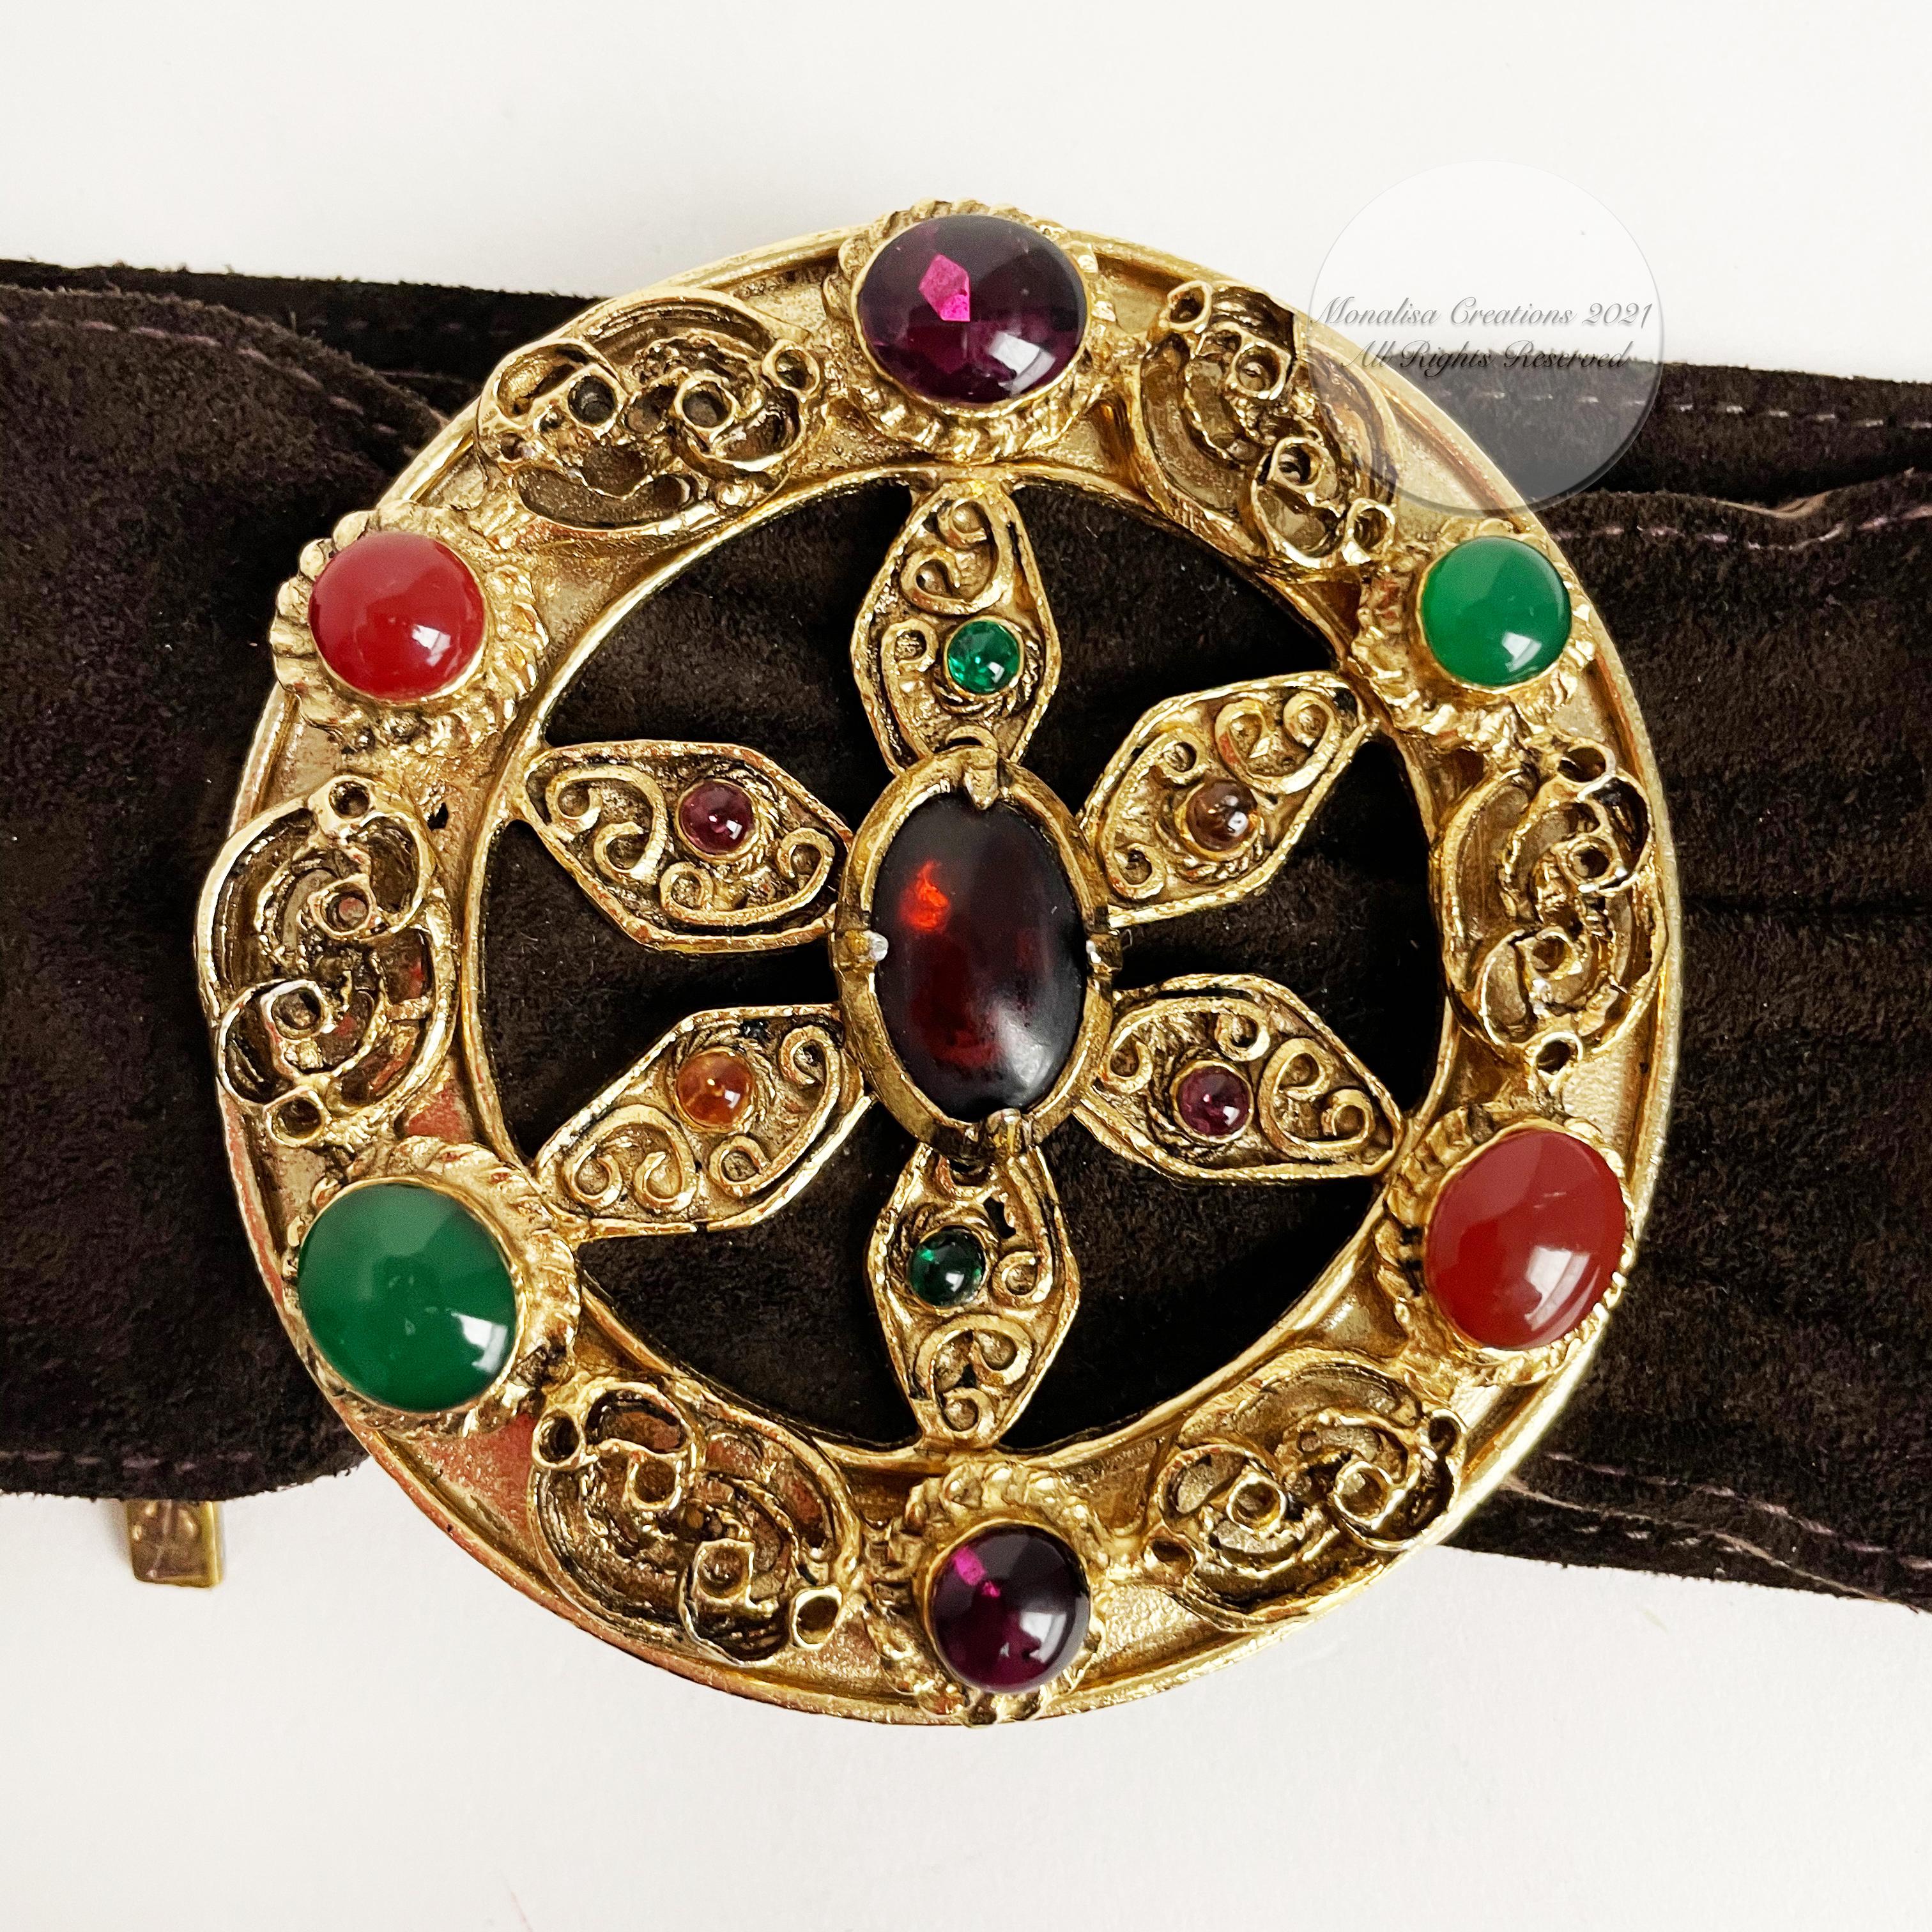 Yves Saint Laurent Belt Colorful Glass Cabochons Buckle Suede Leather 70s S/M 3